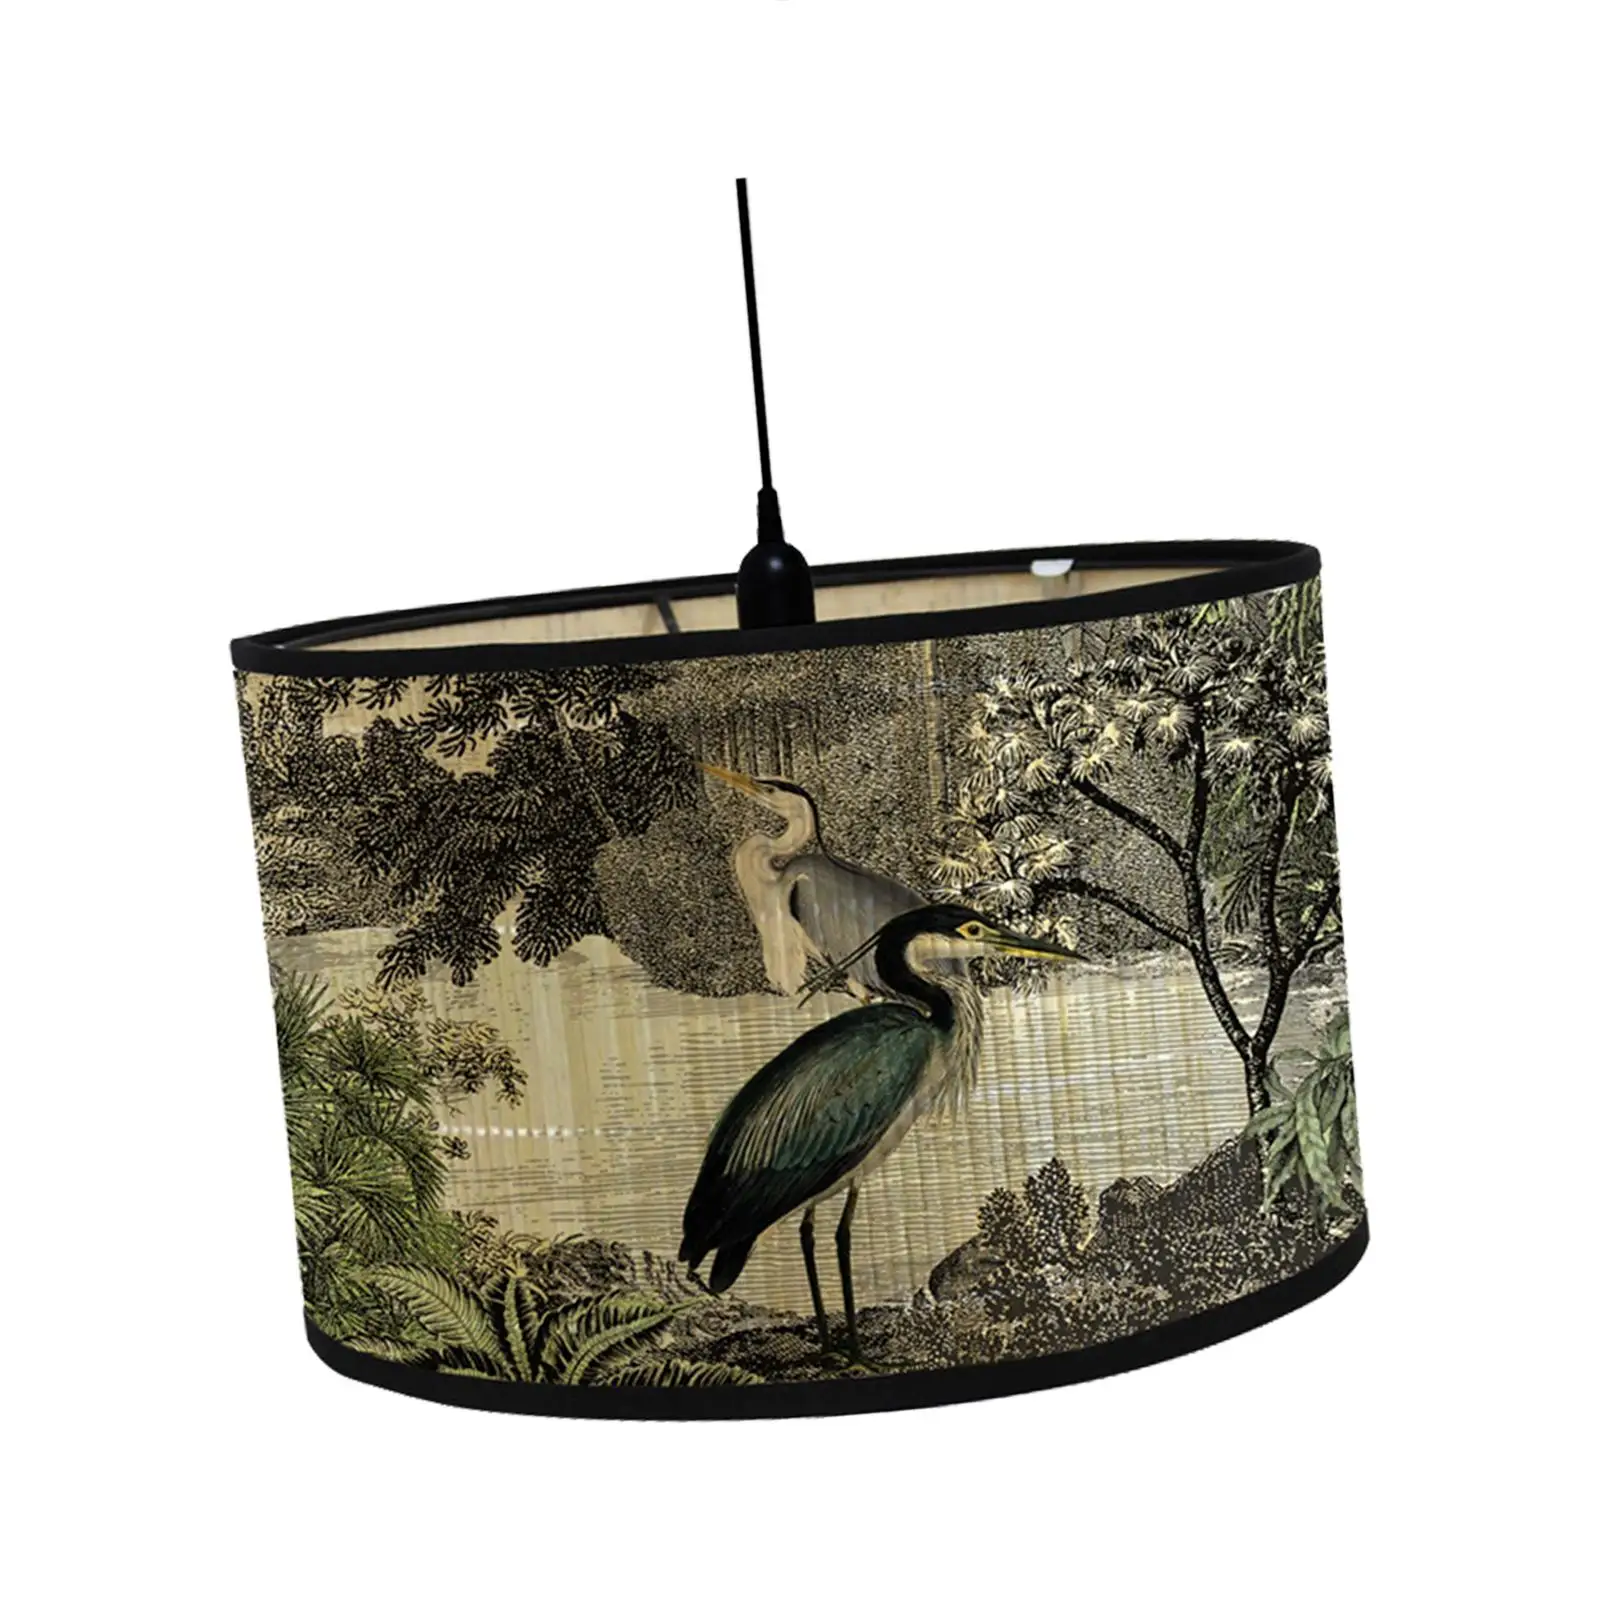 Drum Print Lamp Shade Light Cover 11.8x11.8x8 inch E27 Bamboo Lampshade Cover Drum Shaped Lamp Shades for Table Ceiling Floor